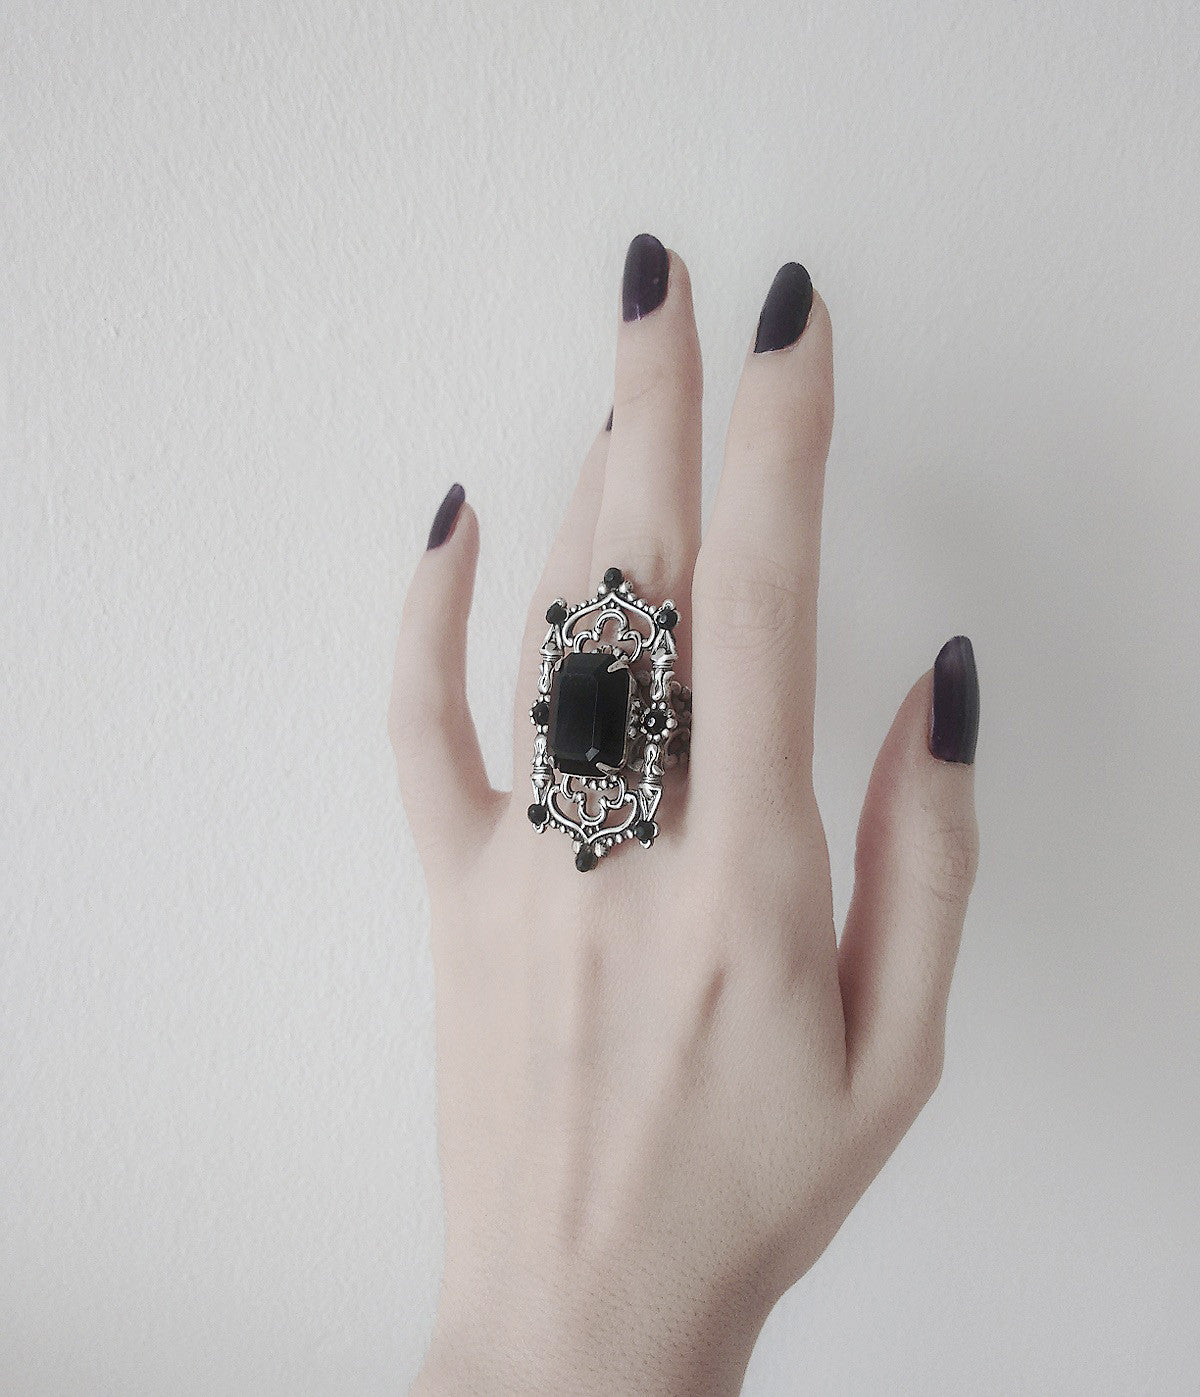 Gothic Cathedral Ring - Aranwen's Jewelry
 - 2